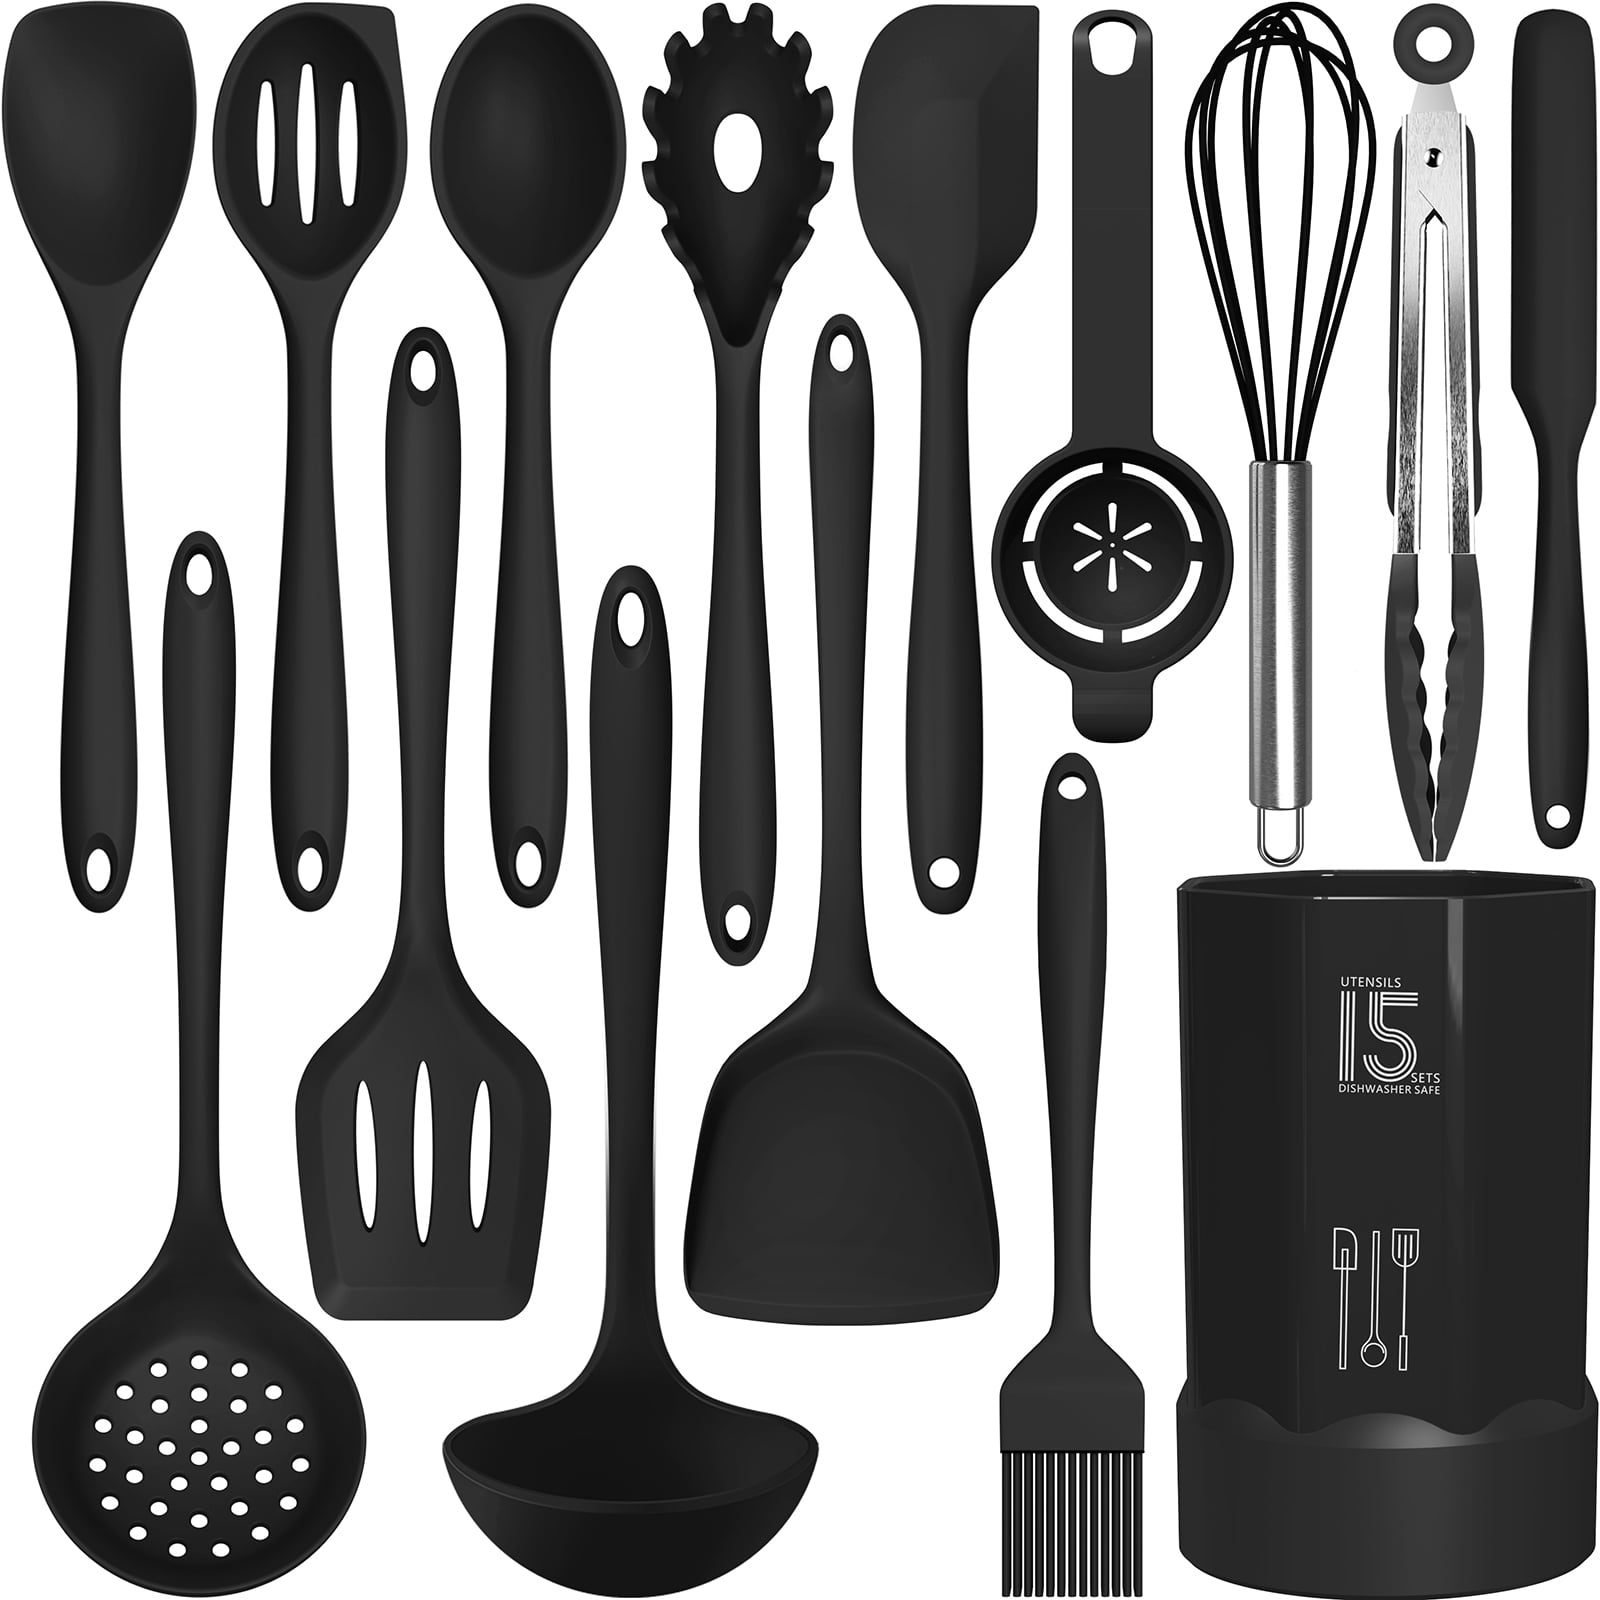 Silicone Cooking Utensils Set - 446°F Heat Resistant Silicone Kitchen  Utensils for Cooking,Kitchen Utensil Spatula Set w Wooden Handles and  Holder